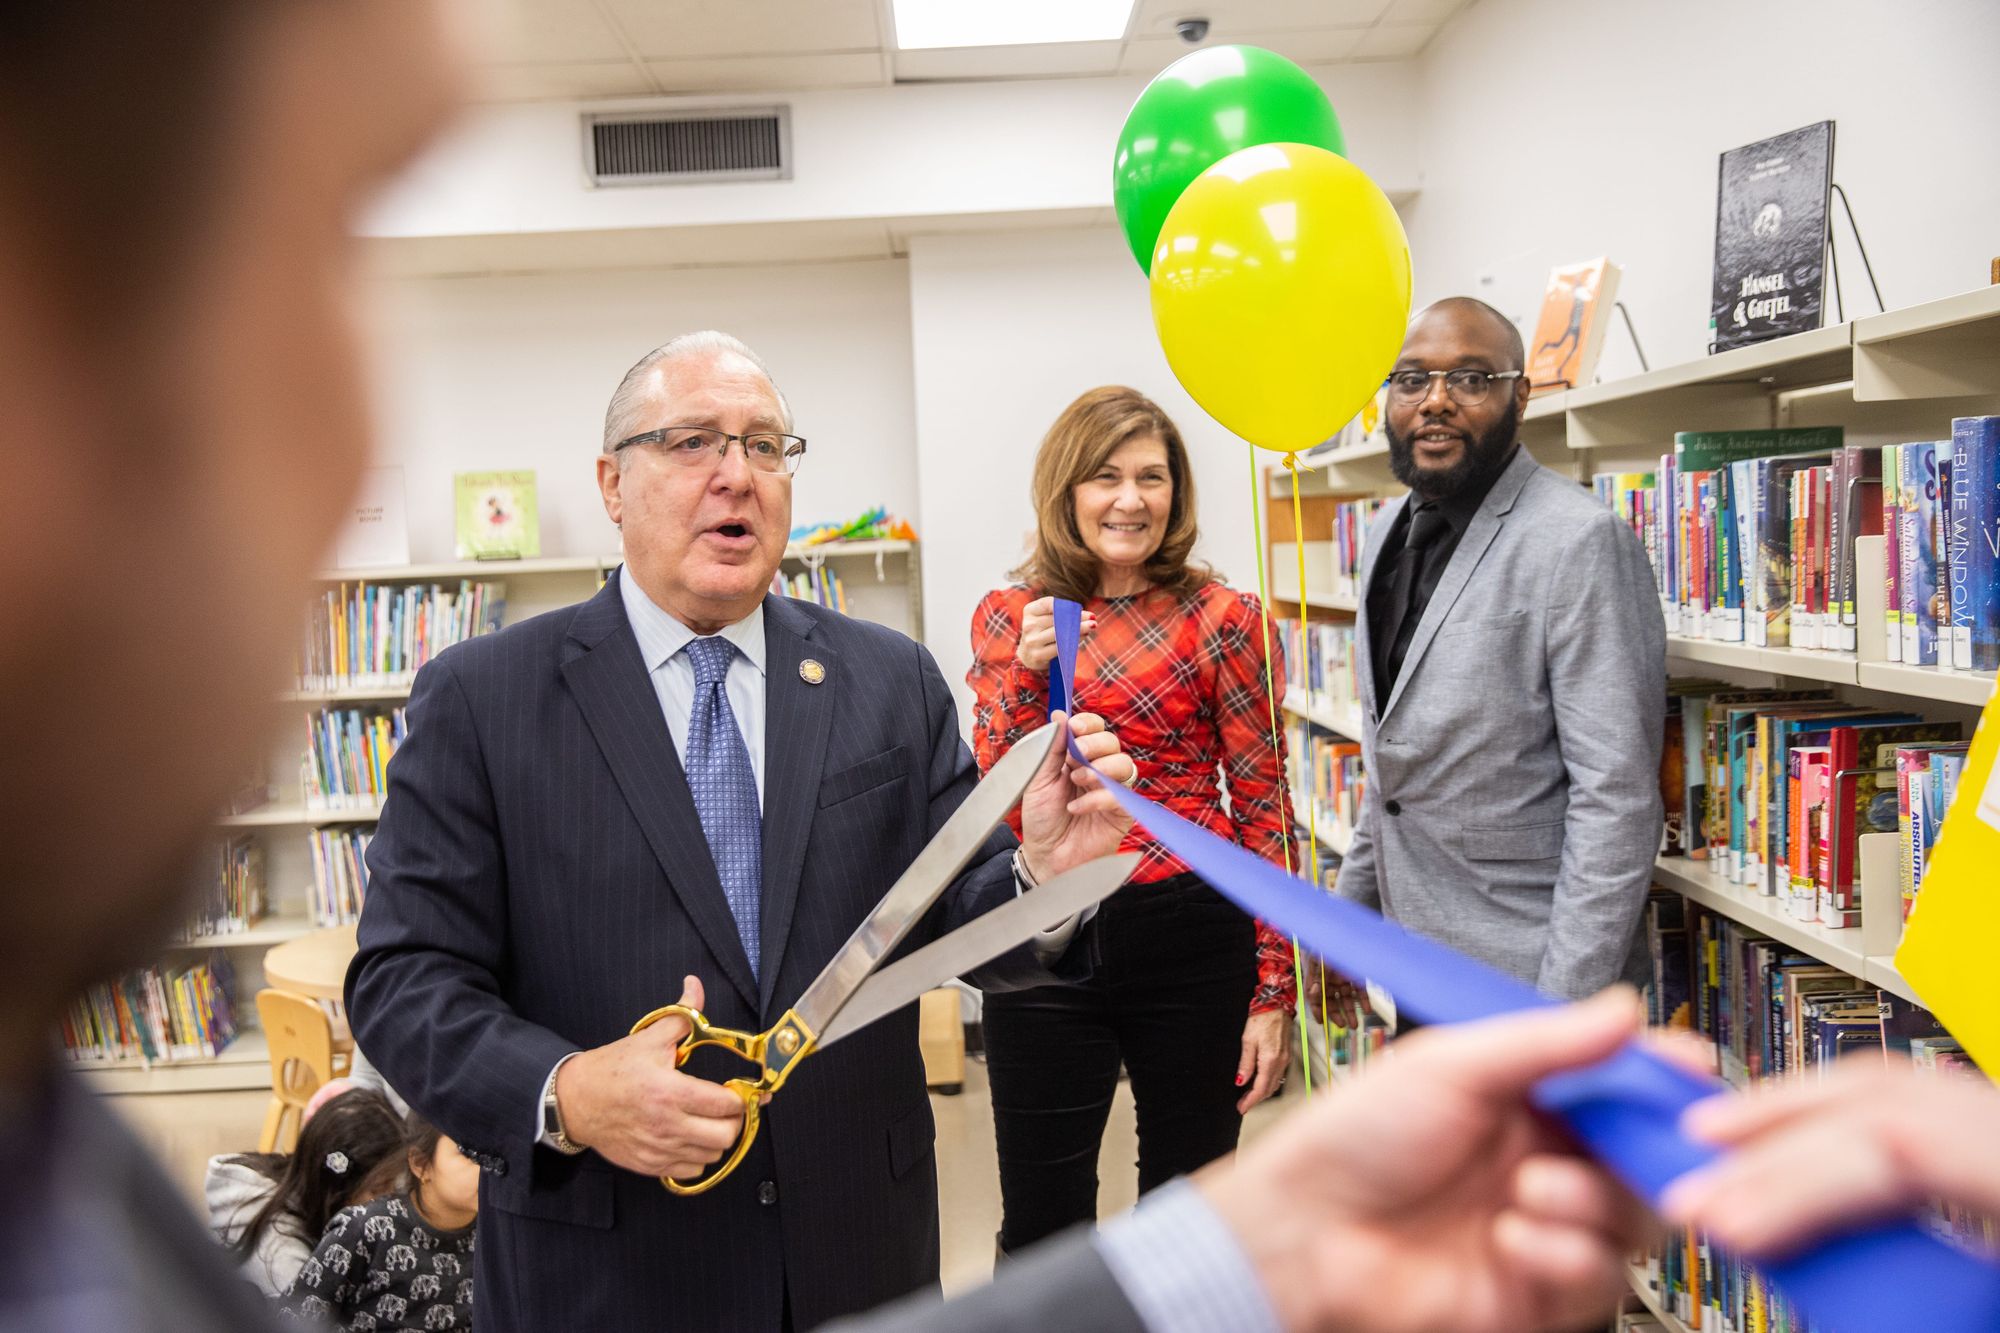 Sheepshead Bay Library Reopens After Renovation